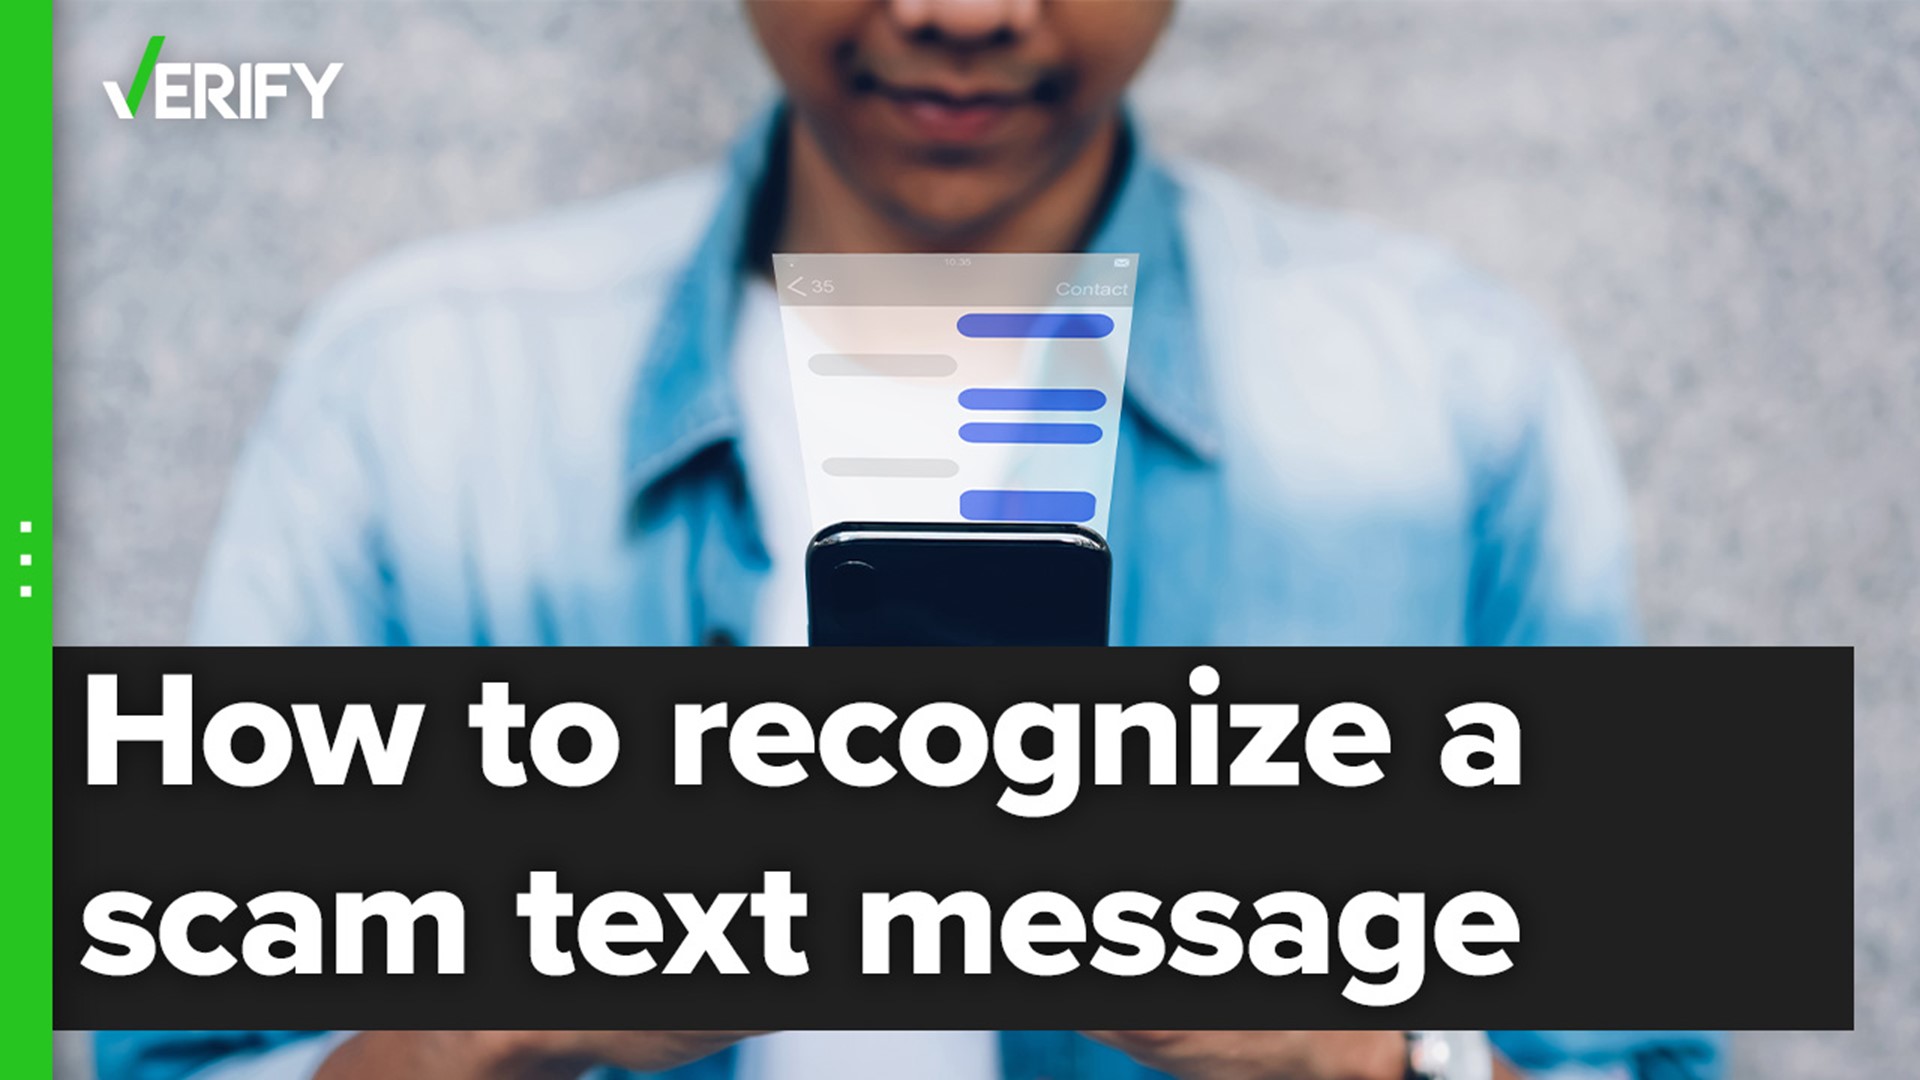 Have you been getting scammy text messages?